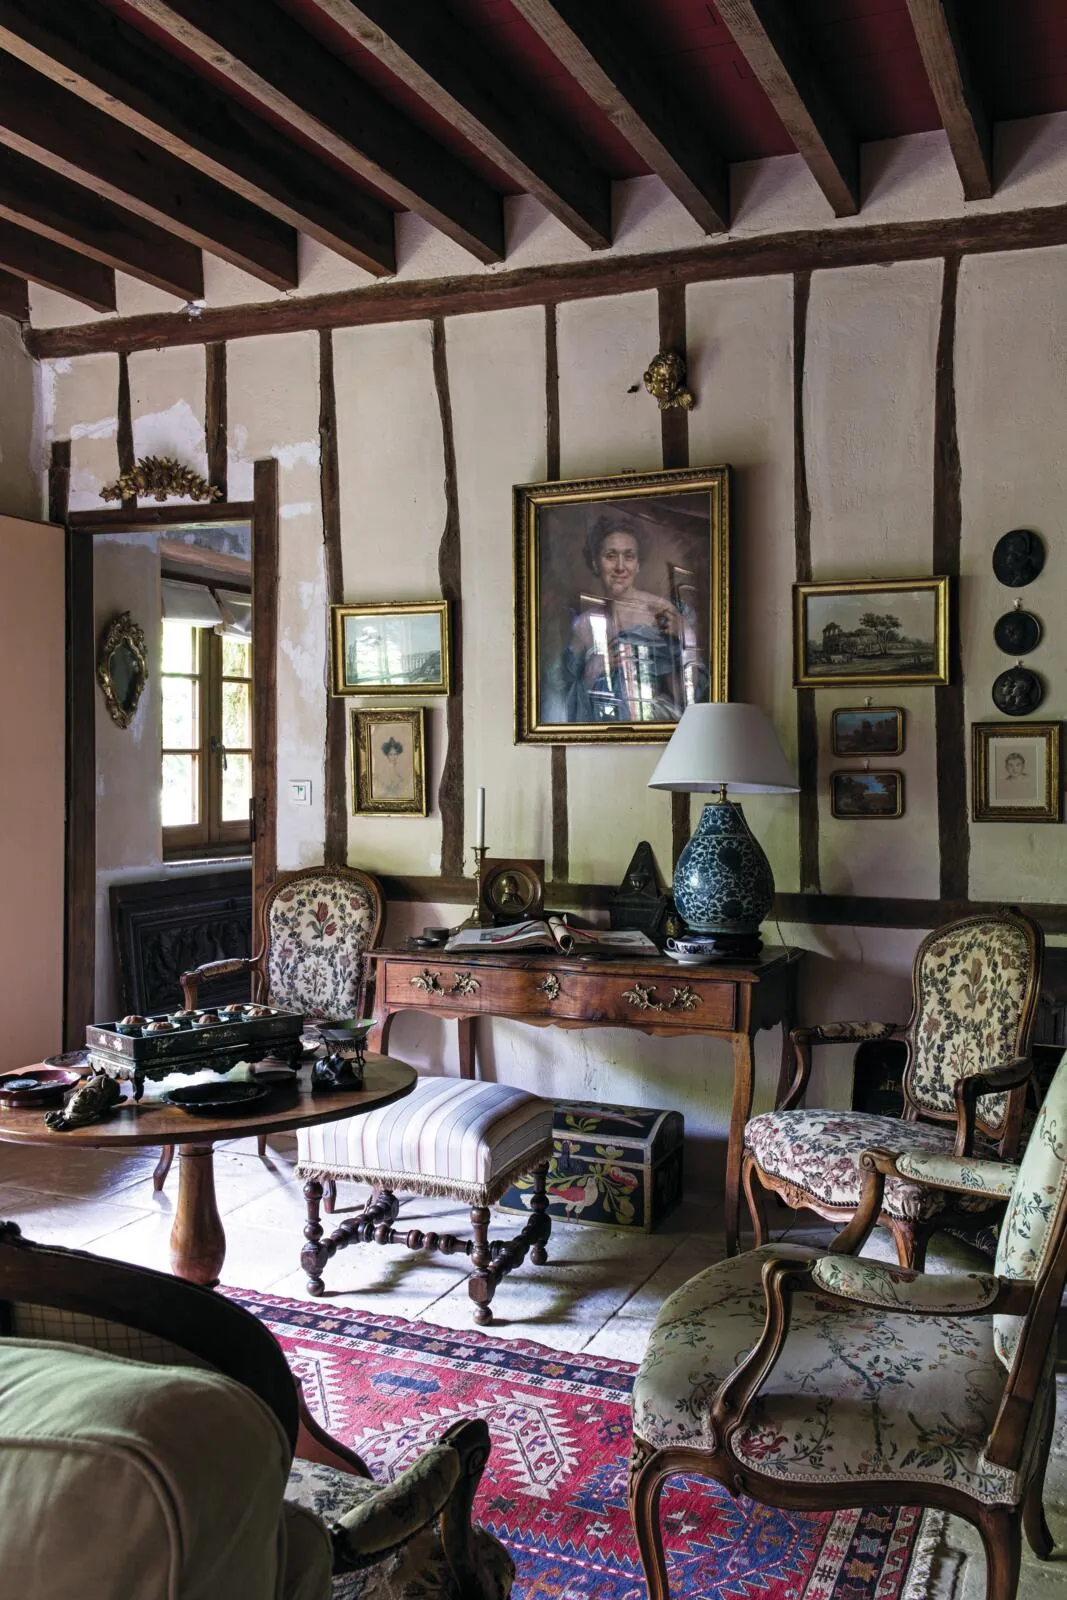 19th-century farmhouse in Normandy sitting room.